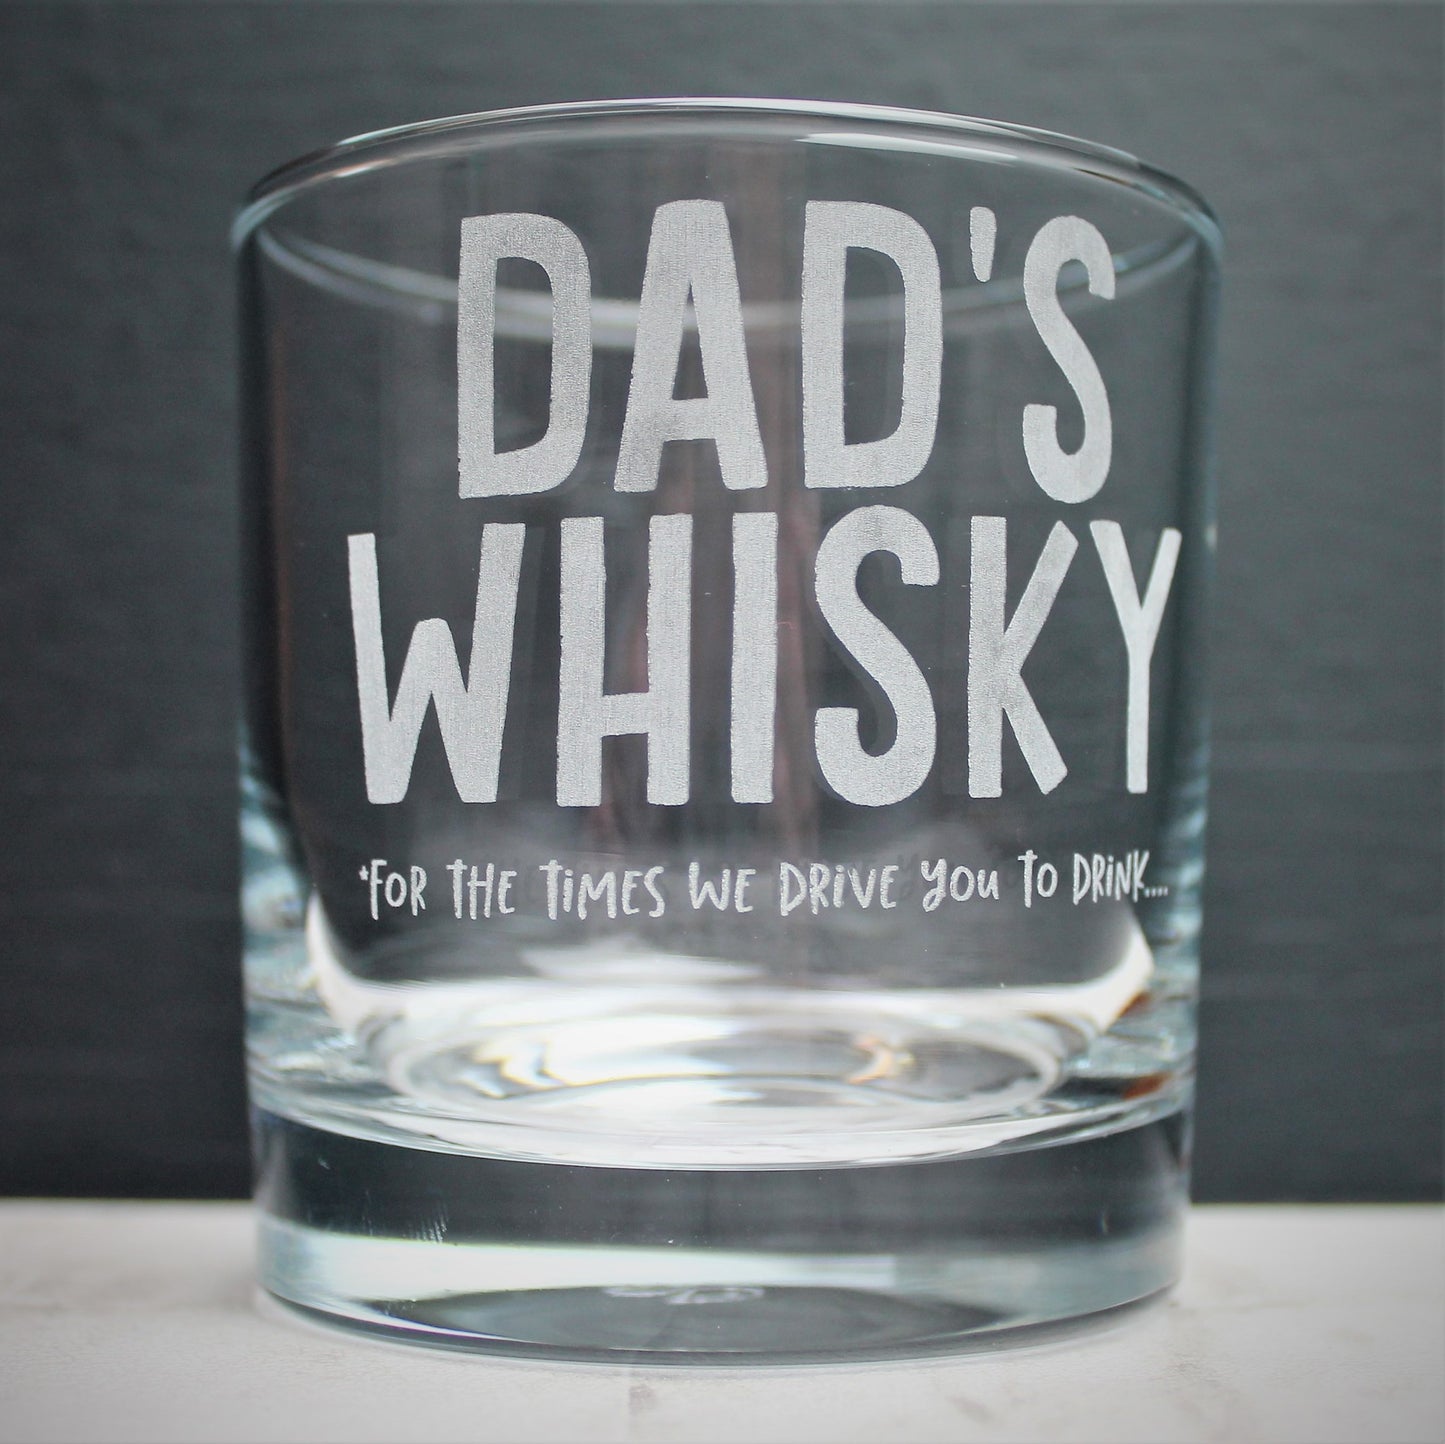 Dads whisky engraved glass tumbler for fathers day 